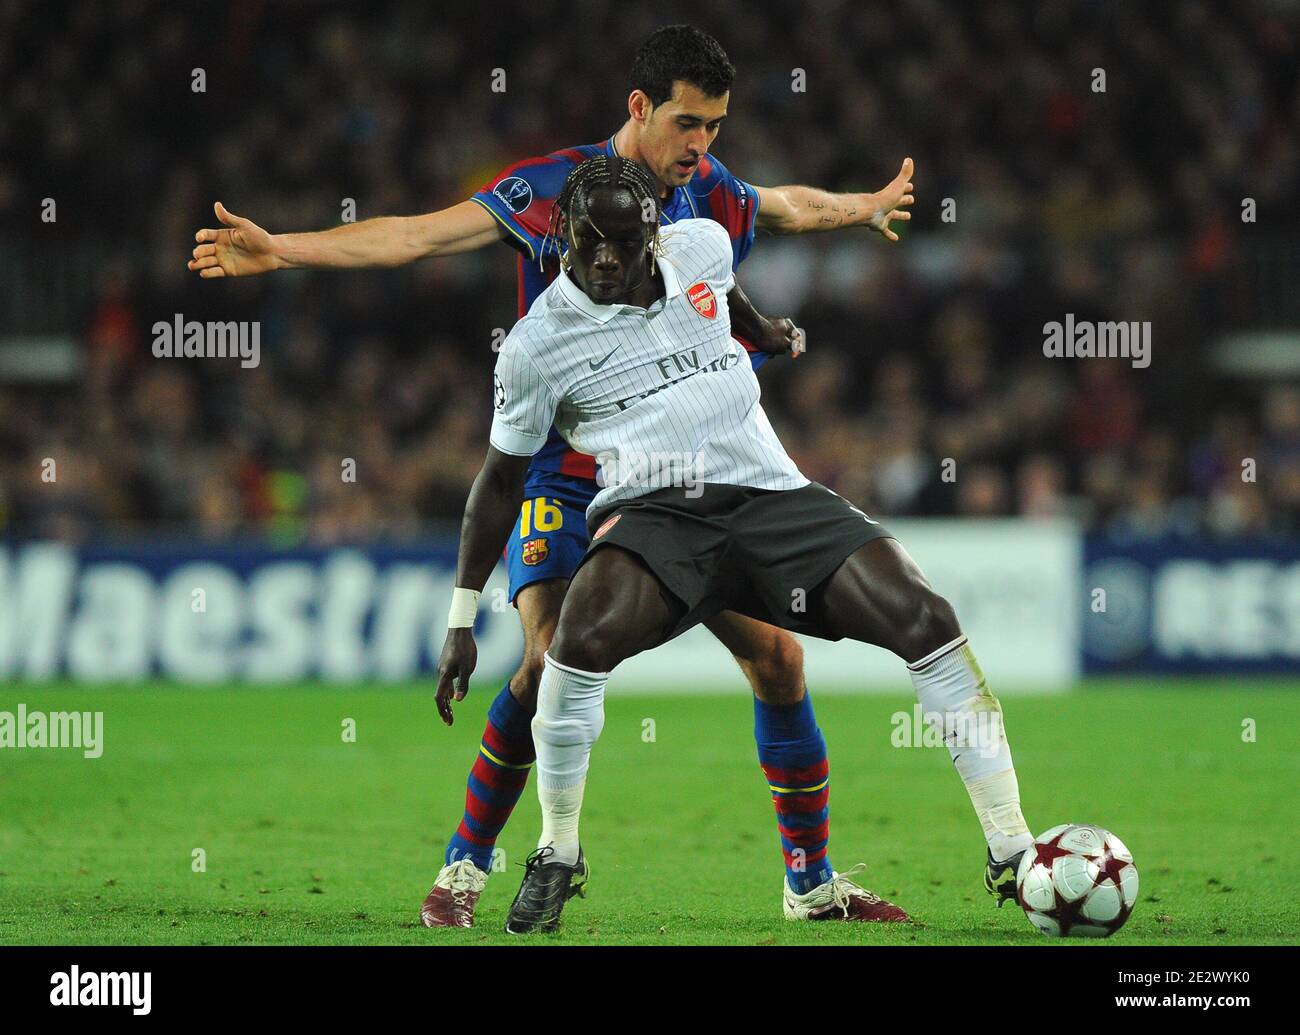 Arsenal's Bacary Sagna challenges Barcelona's Sergi Busquets during the UEFA Champions League,Quarter Final, Second Leg Soccer match, FC Barcelona vs Arsenal at Nou Camp in Barcelona, Spain on March 6, 2010. Barcelona beat Arsenal 4-1 to reach the Champions League semifinals for the third straight year. Photo by Christian Liewig/ABACAPRESS.COM Stock Photo